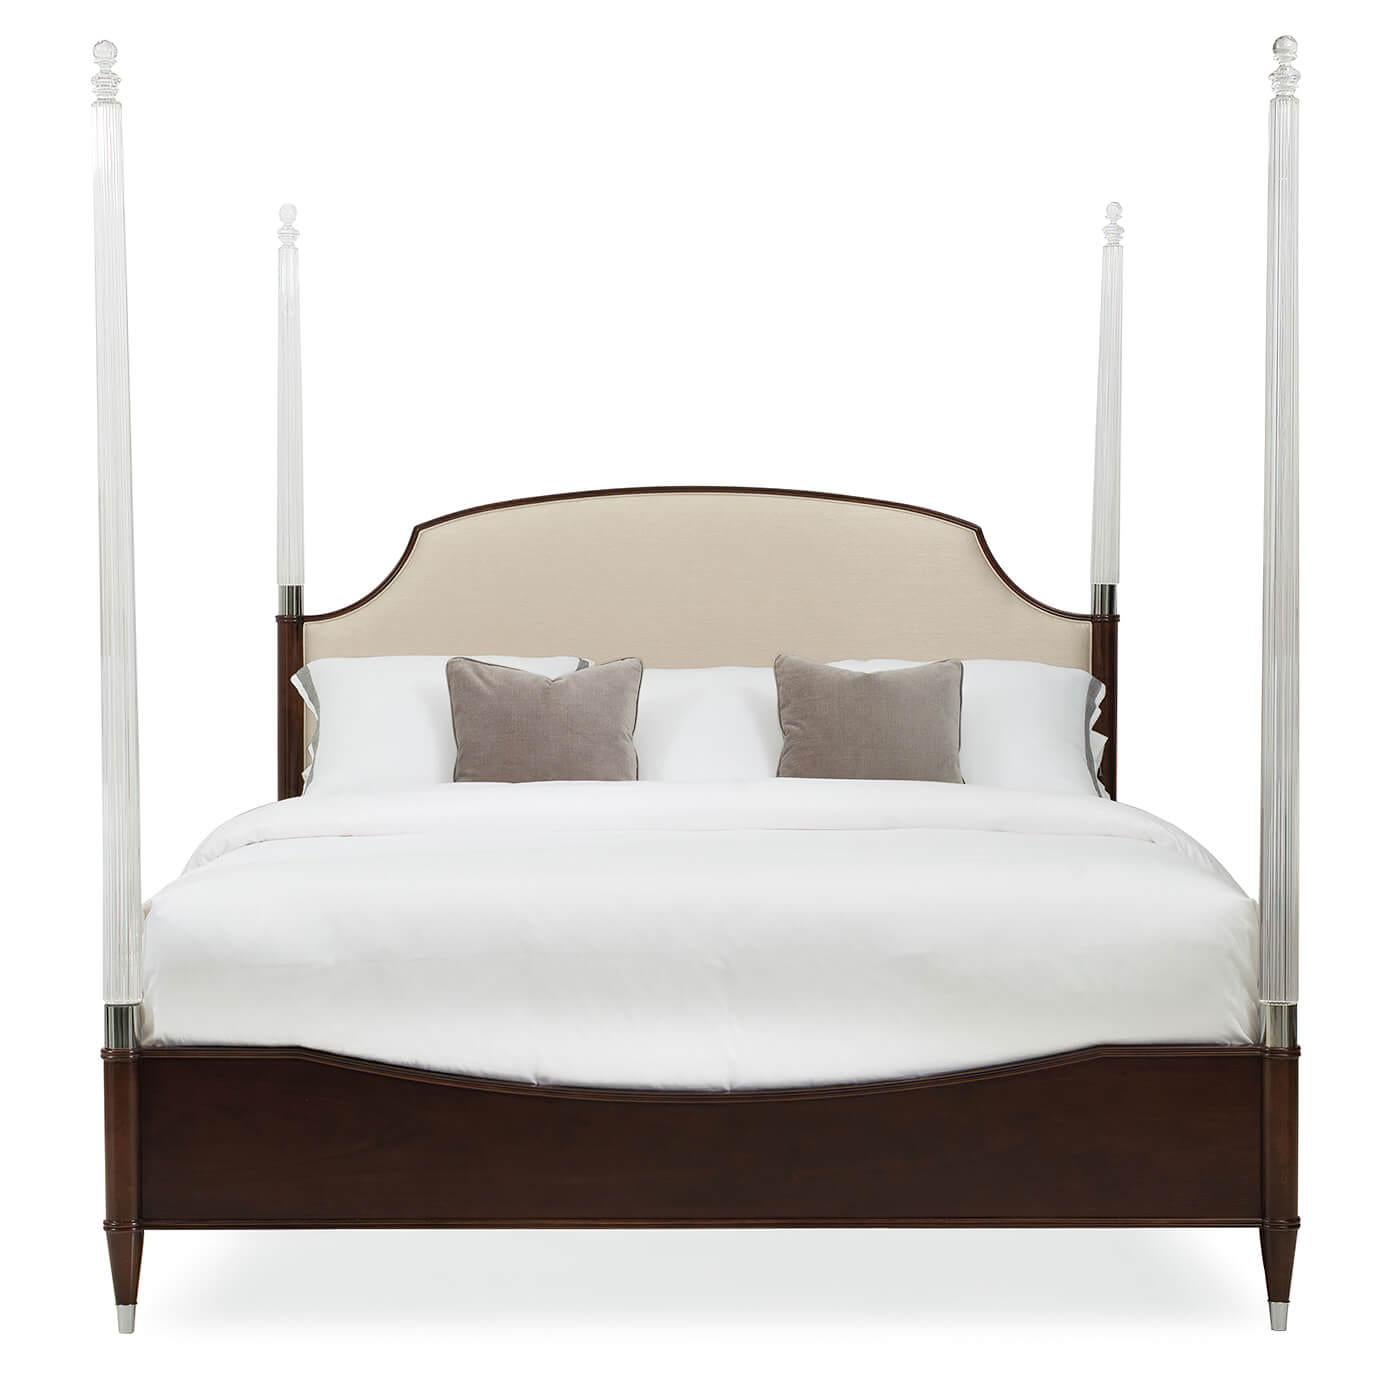 A Classic king size lucite four-post with an upholstered headboard. This beautiful bed has a Classic design with elegant modern details including clear acrylic posts and stainless steel ferrules. It has a wood footboard and side rails finished in